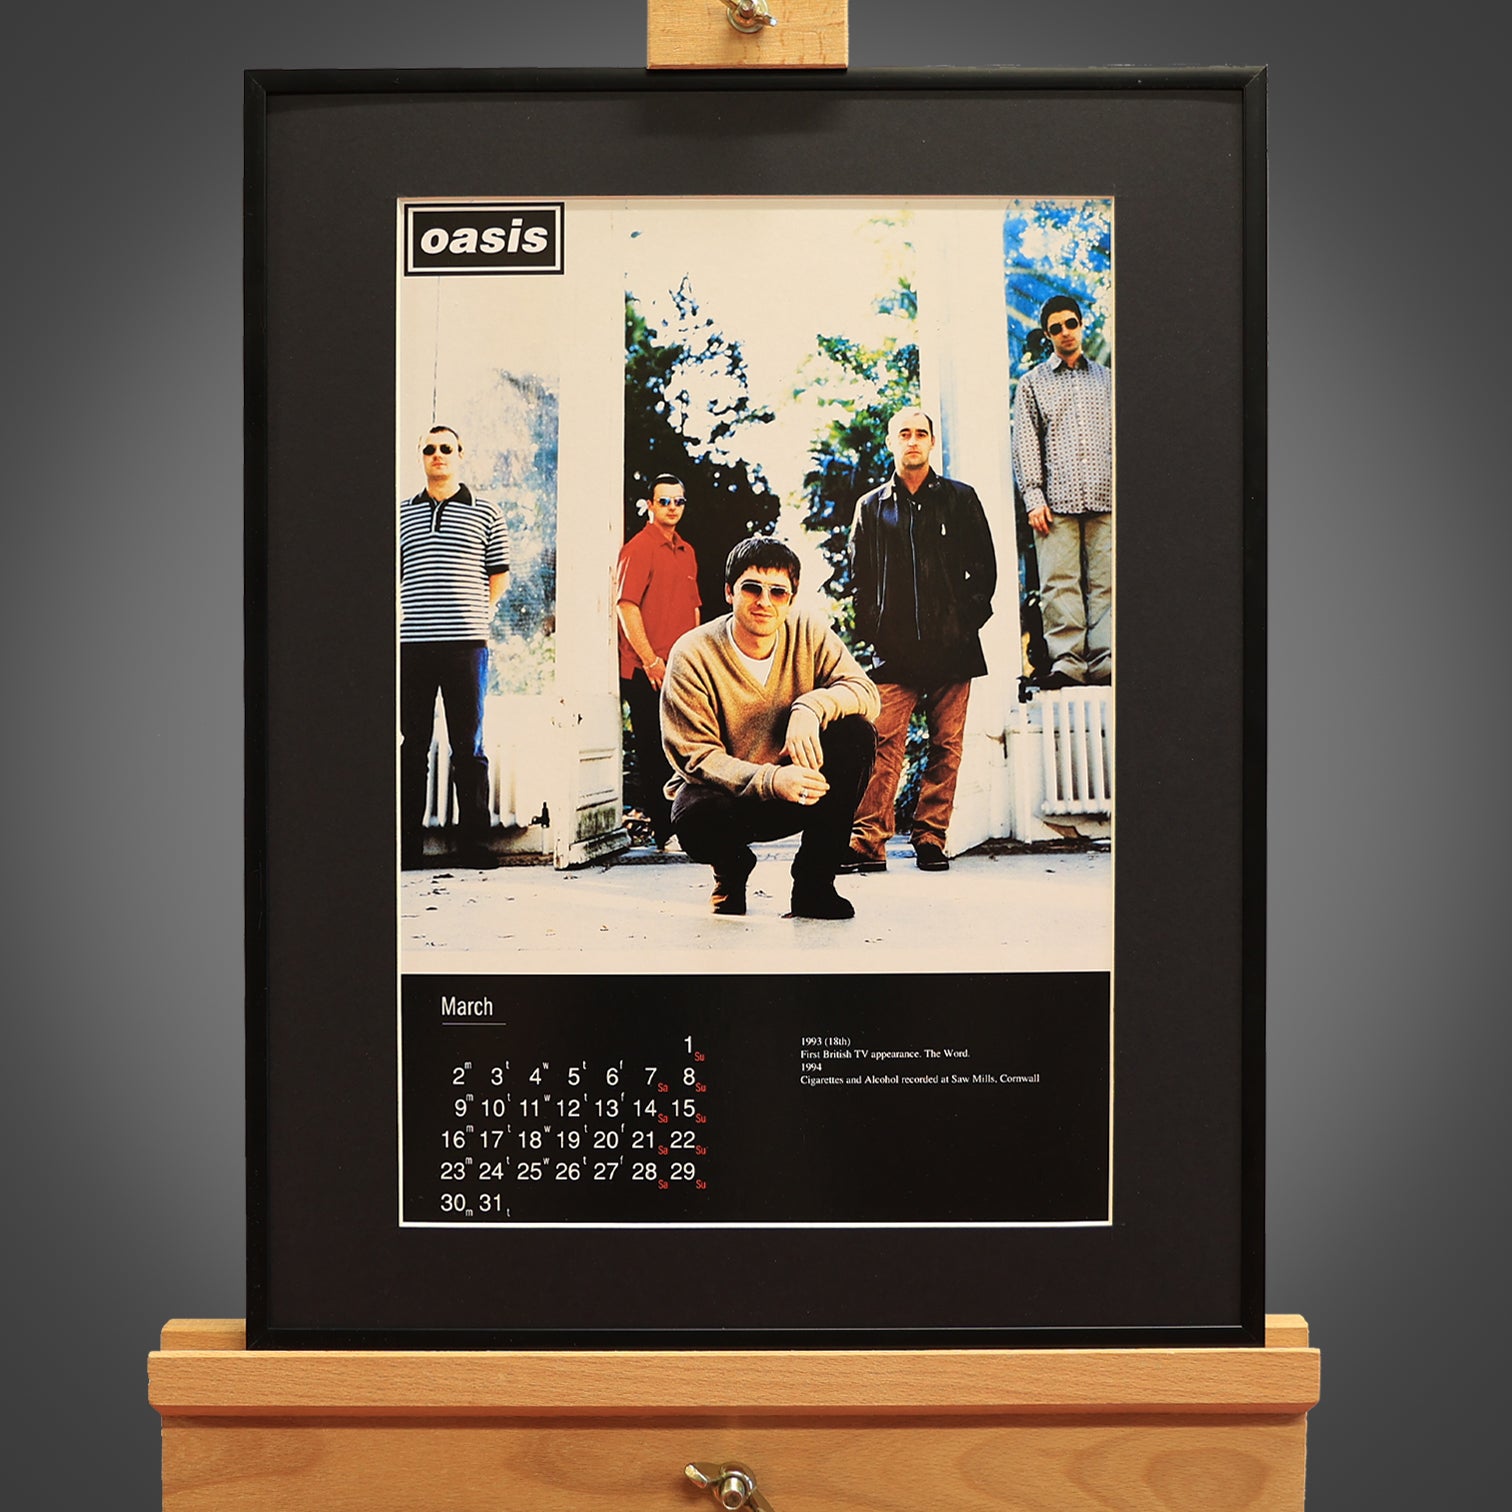 Oasis - March Personalised Calendar.